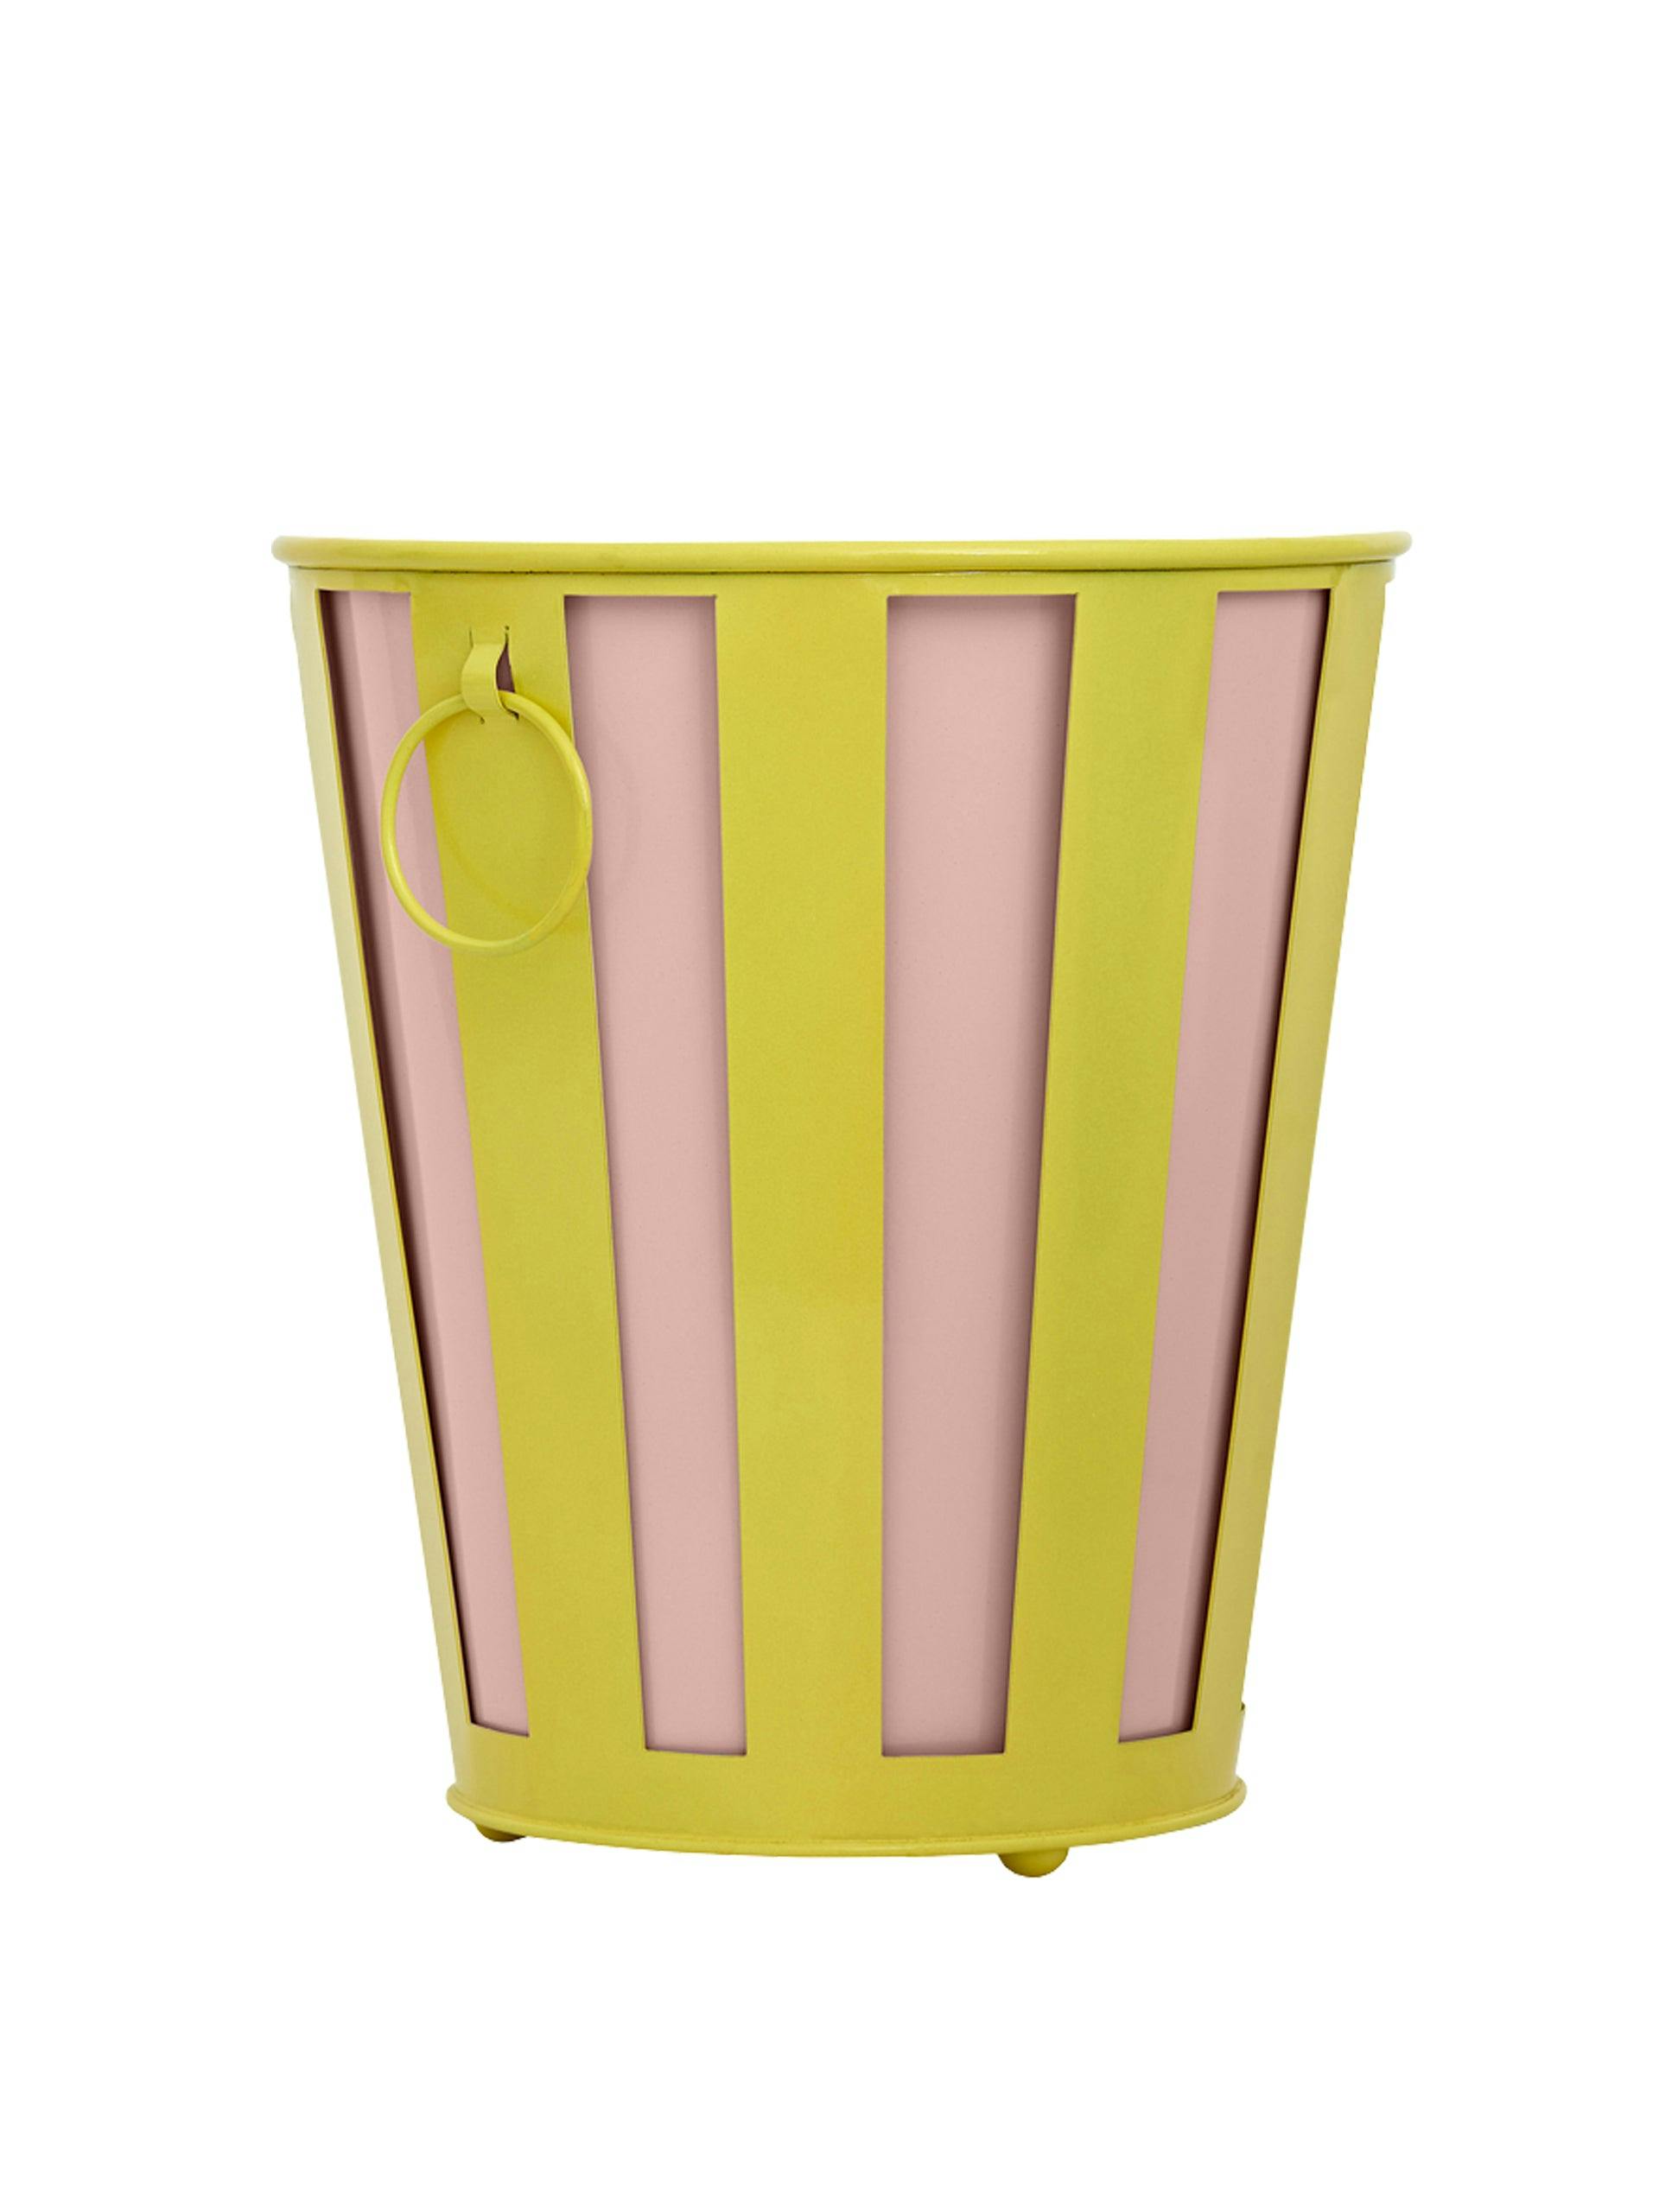 Yellow and pink striped planter